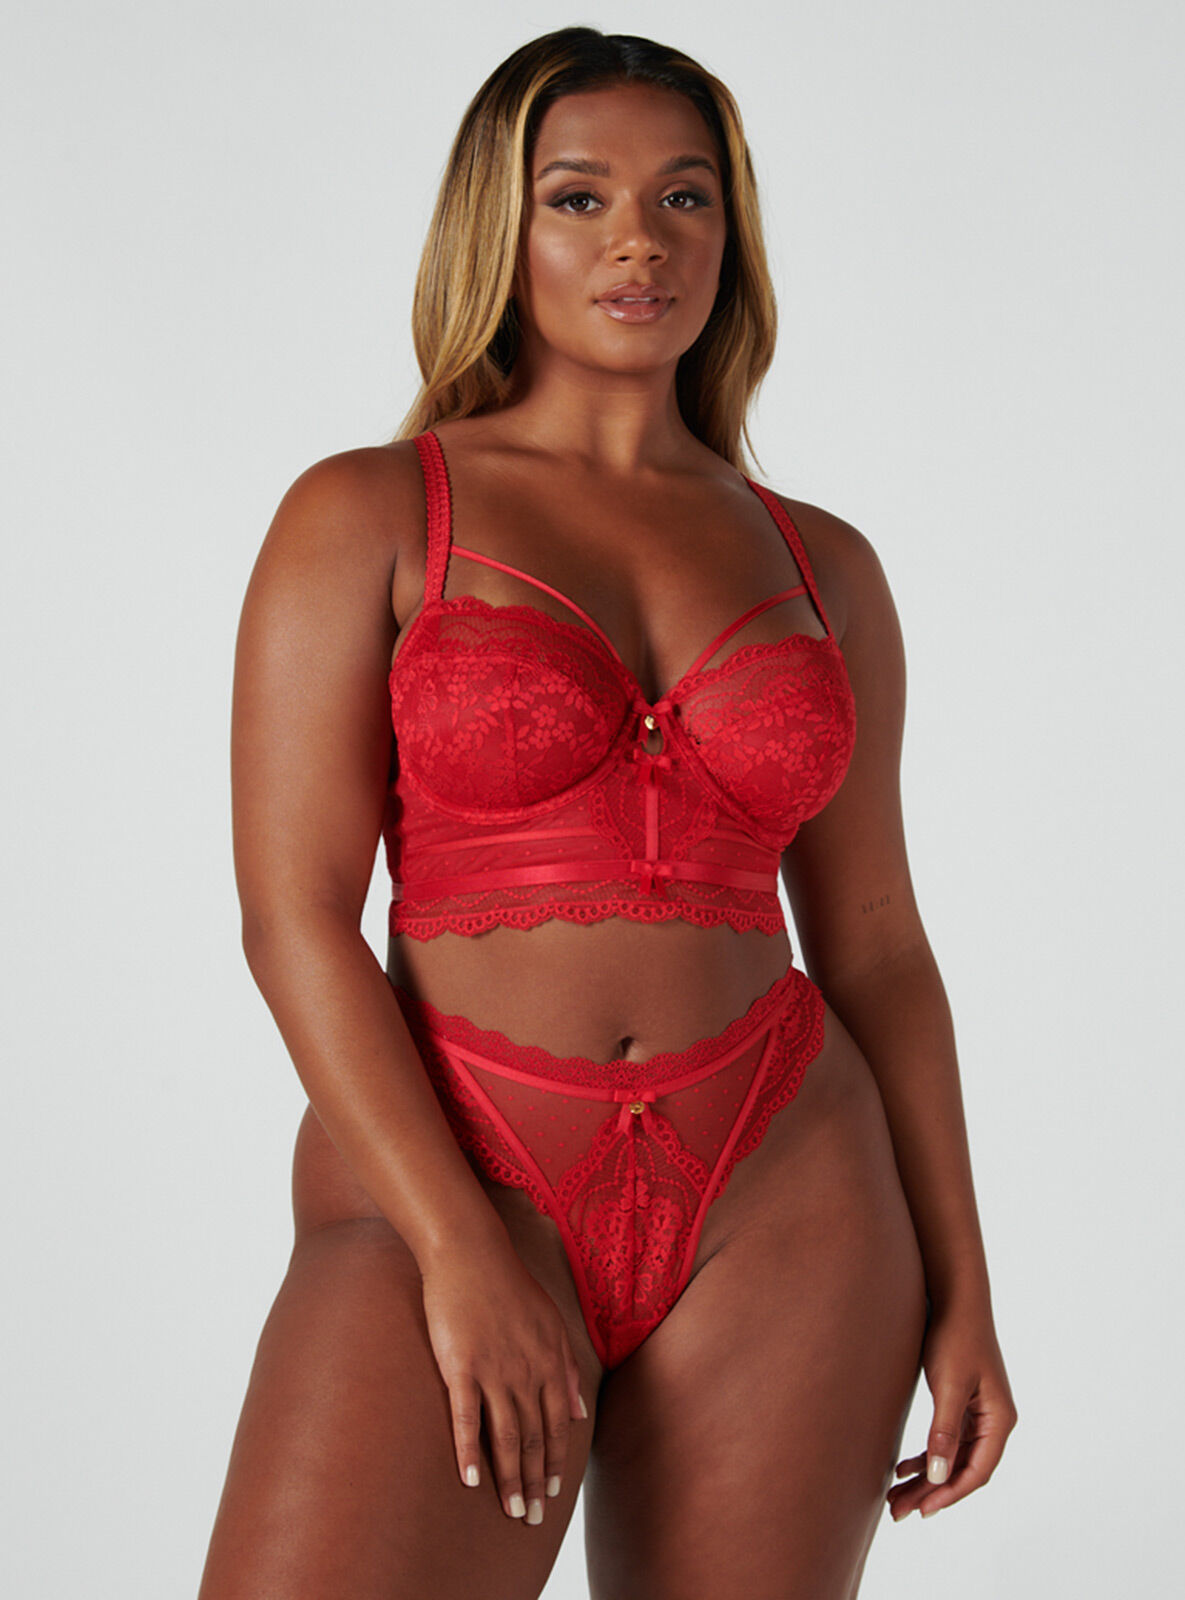 Boux Avenue Averie thong - Dark Red - 12